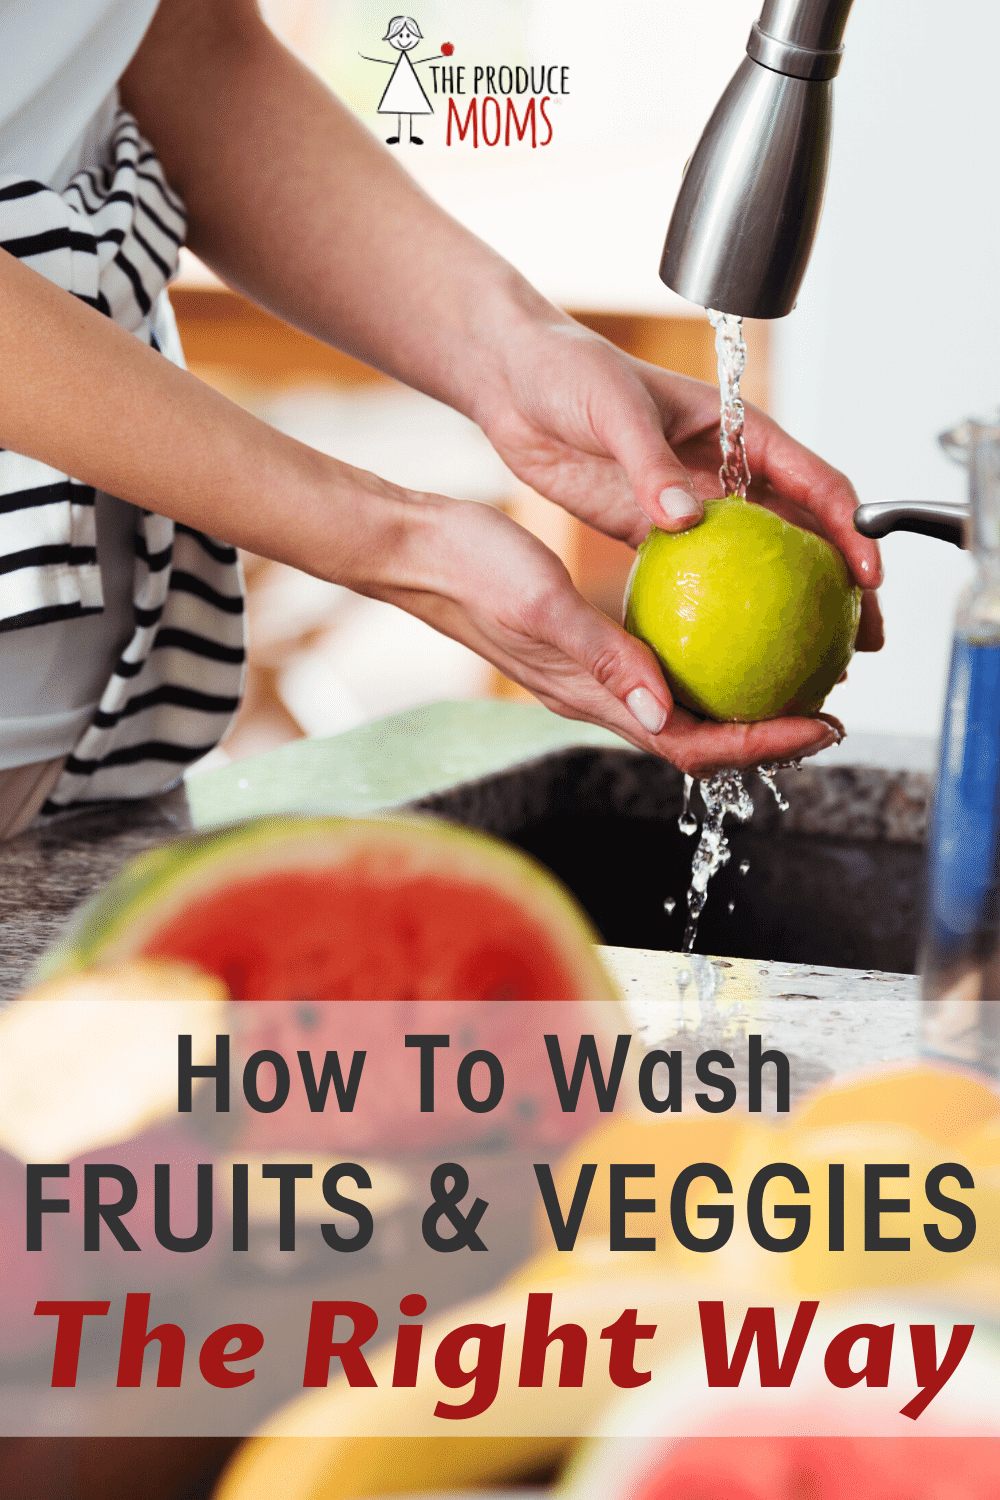 How to wash fruits and veggies the right way